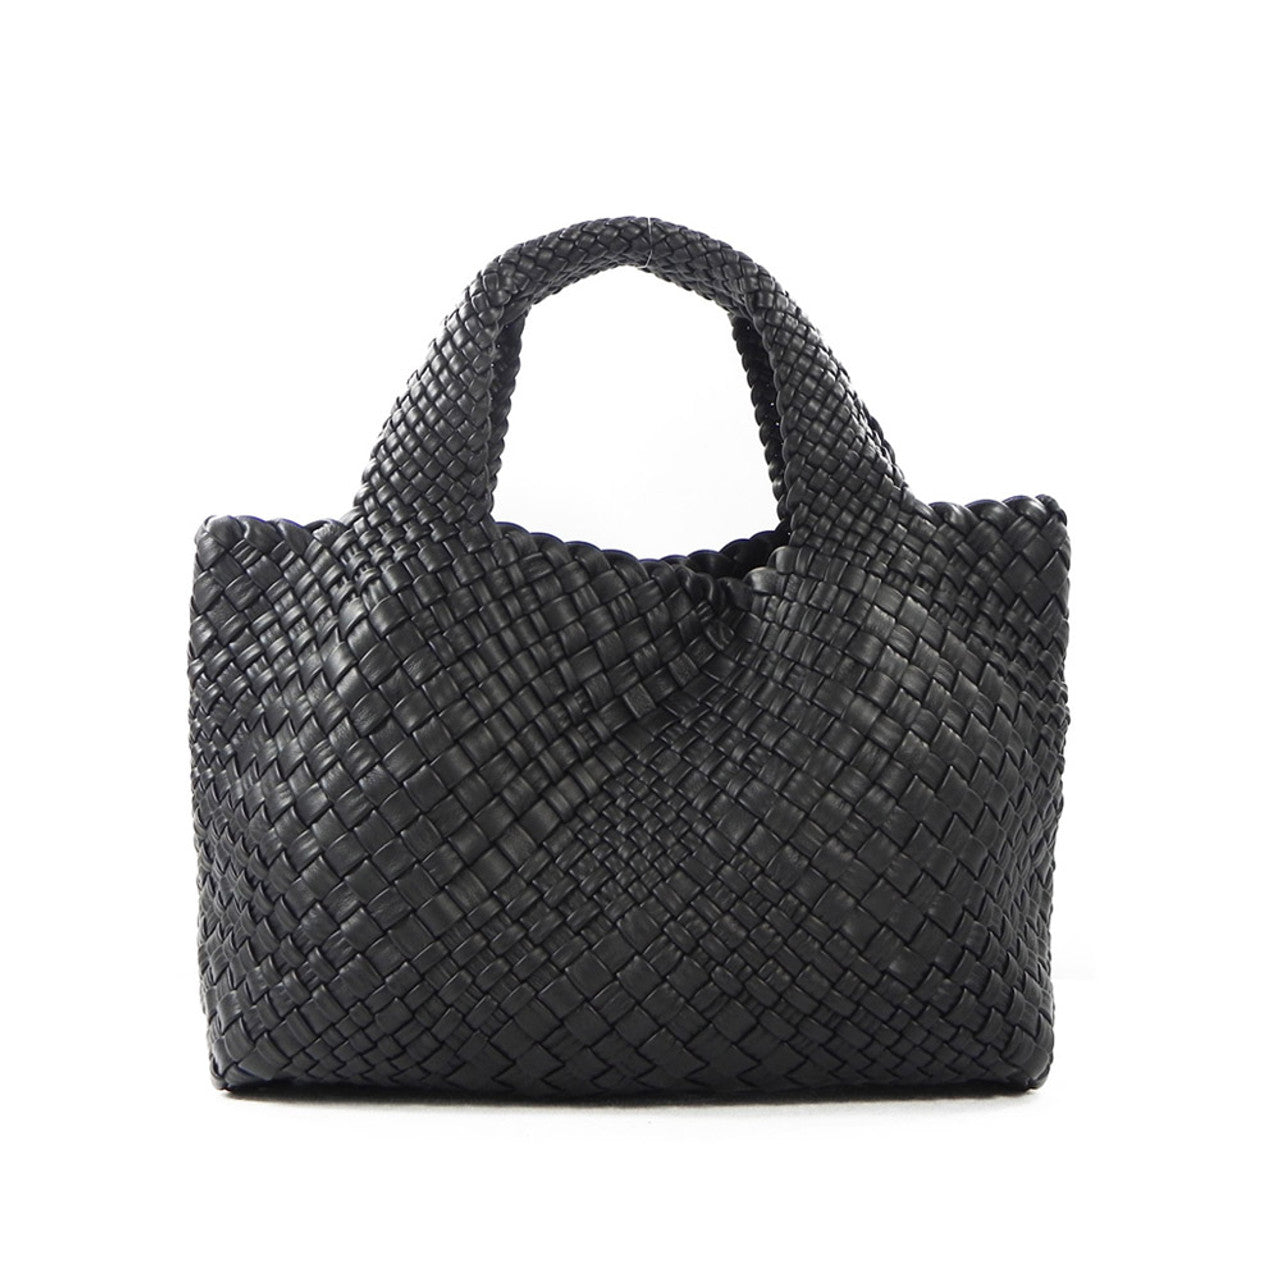 Luxury woven leather bags Made In Italy.